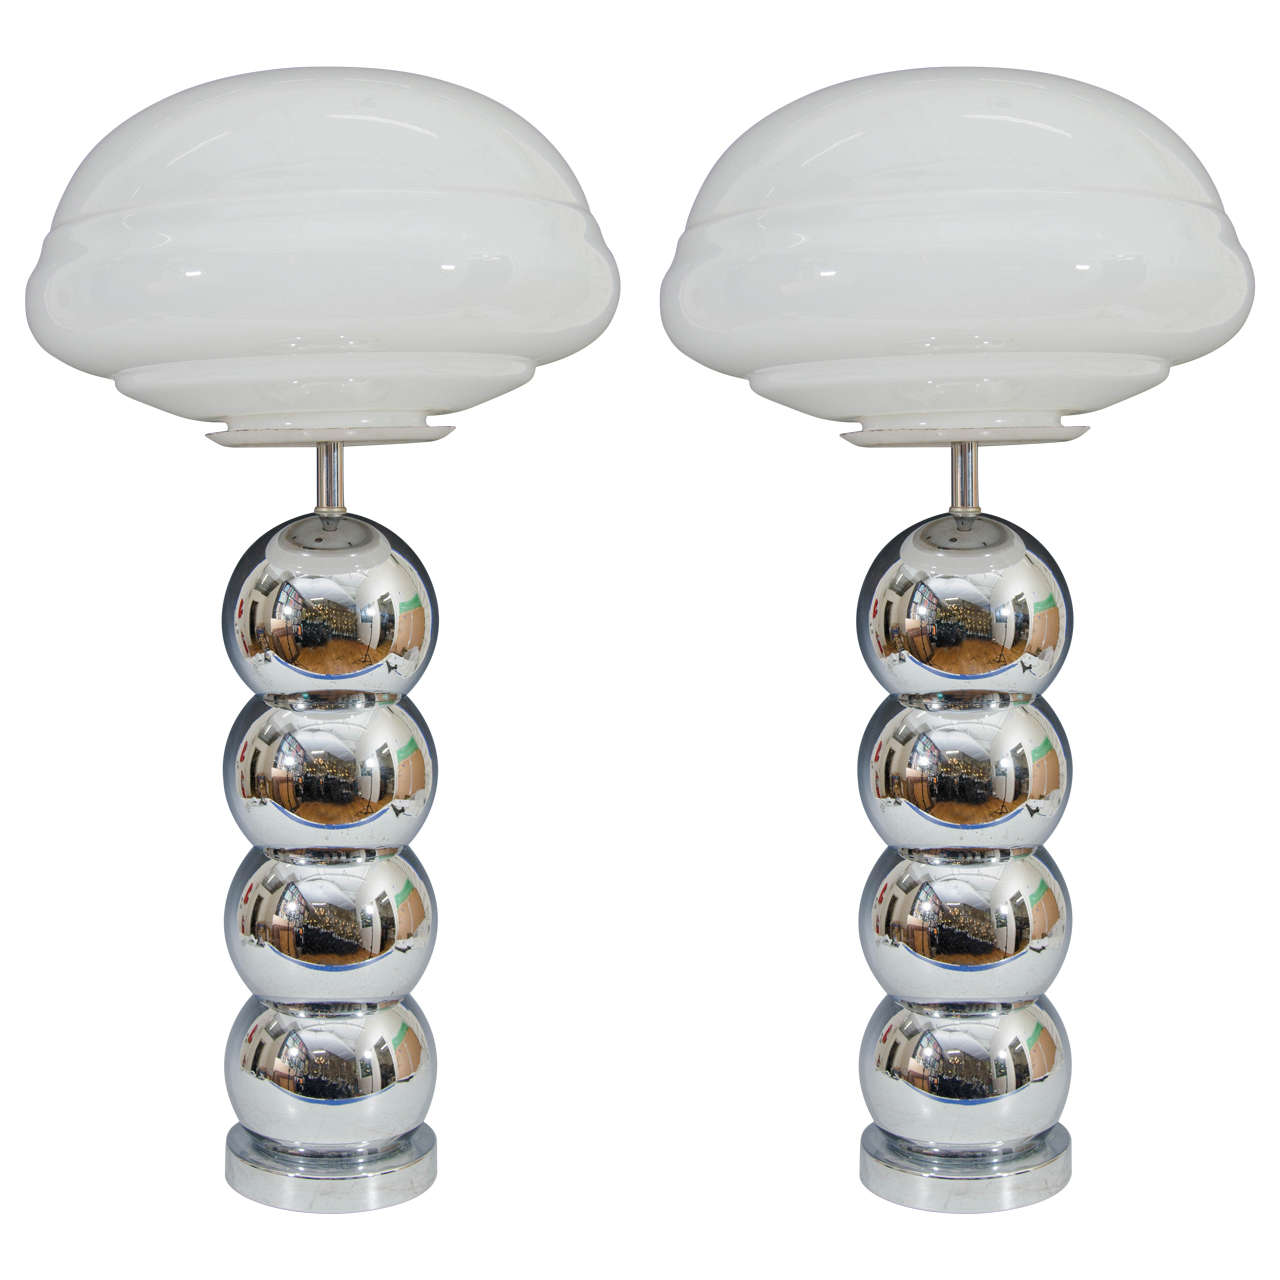 Midcentury Chrome Stacked Table Lamps with Large Frosted Glass Shades